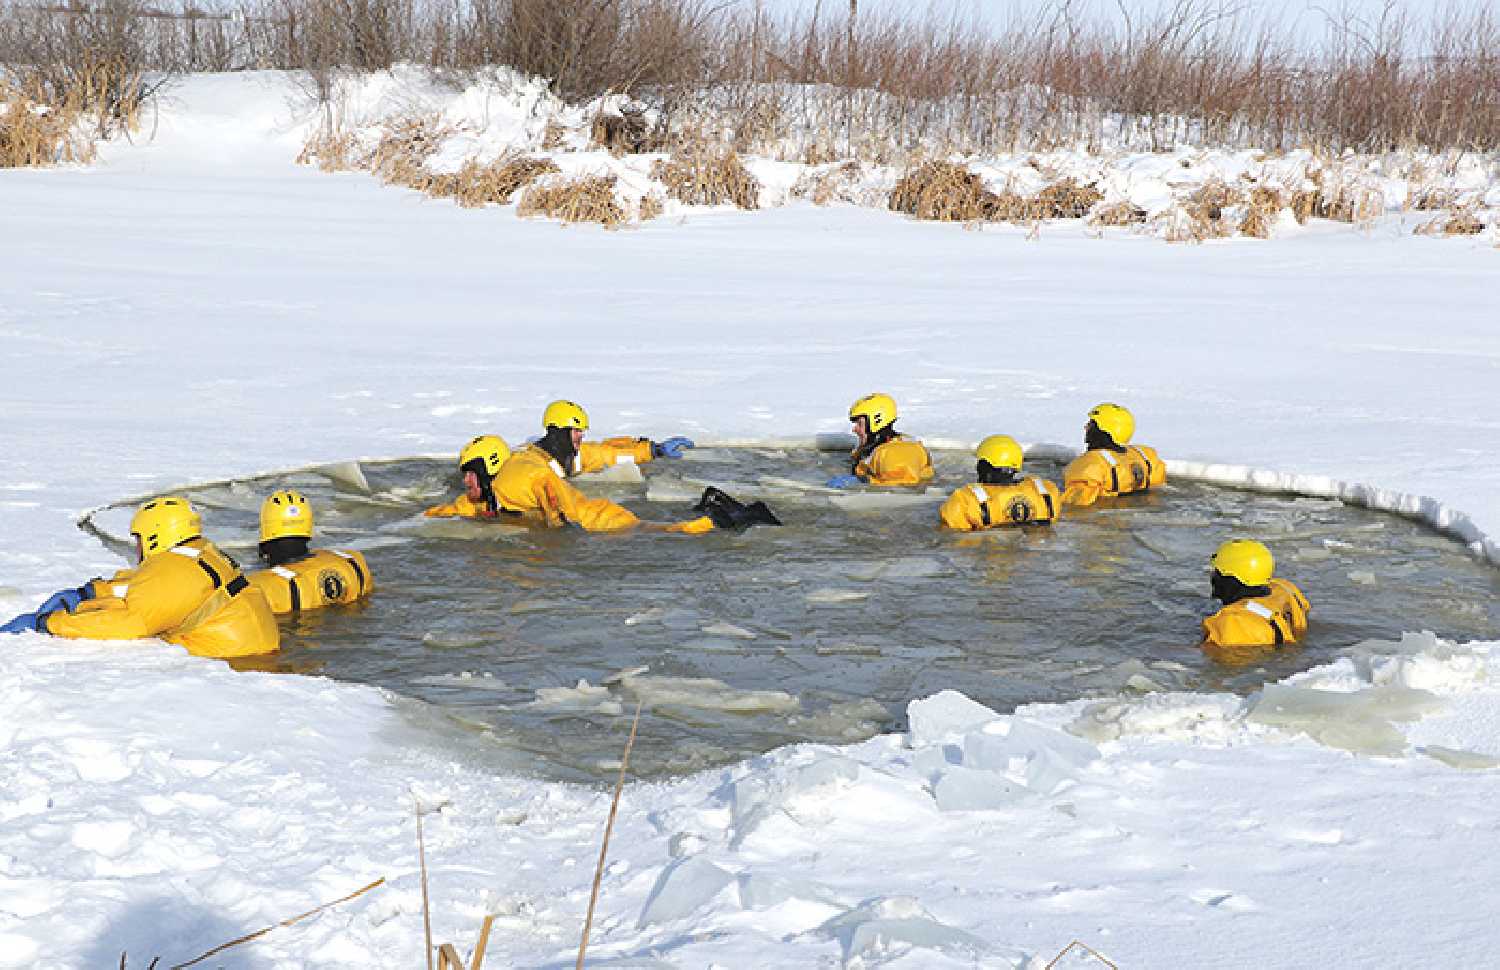 Twenty firefighters from Redvers, Carnduff and Carievale participated in a water rescue course last weekend in Redvers. Above are a few firefighters training in -23 C weather. The team was out there all day learning and training. 